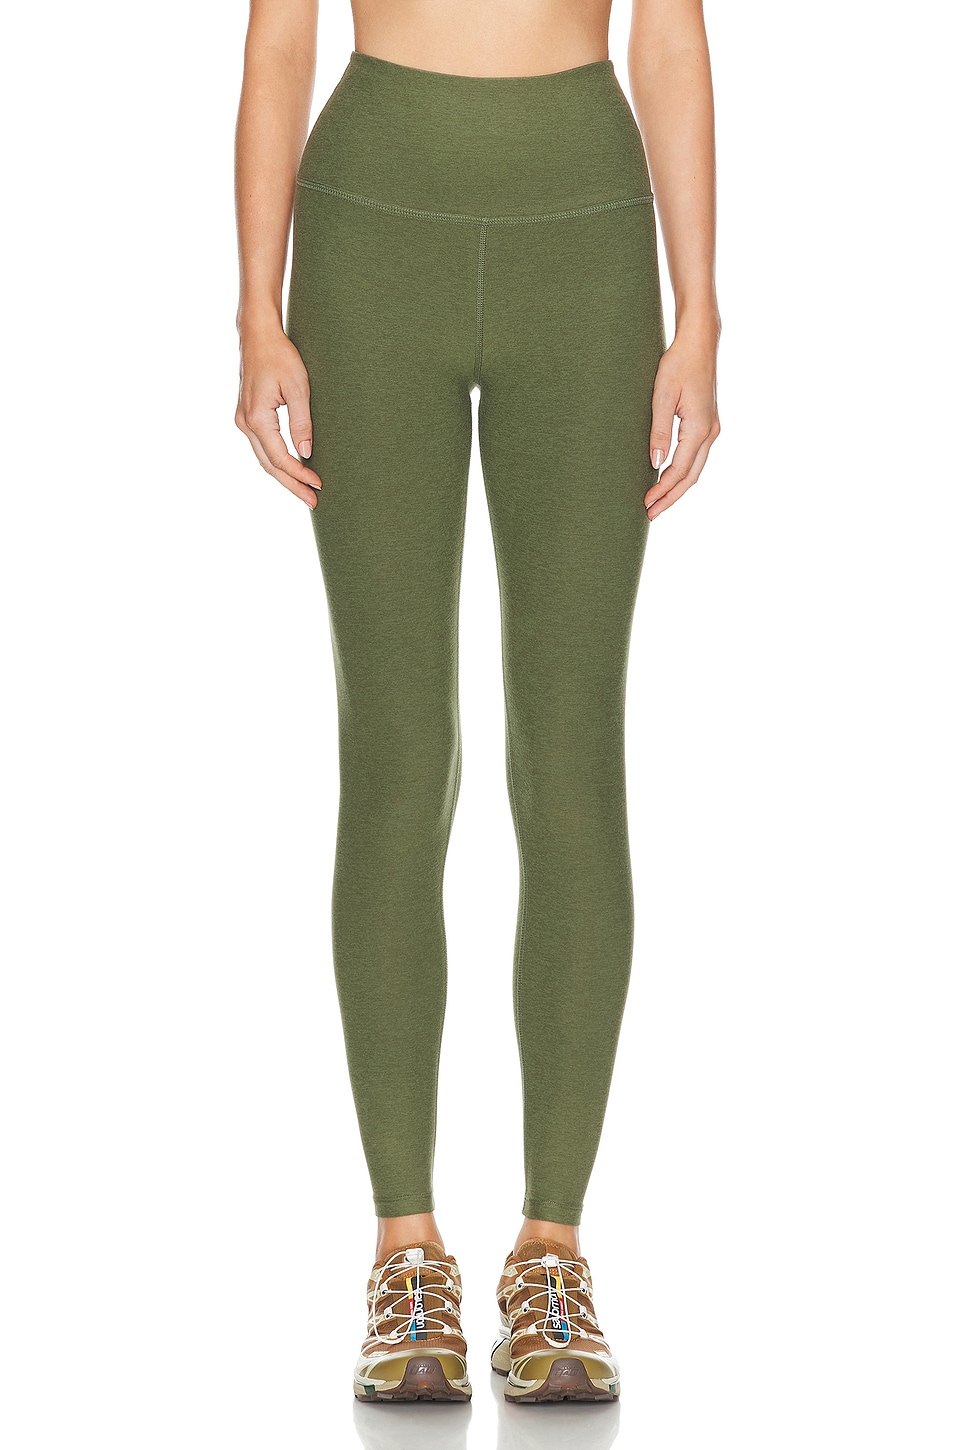 Image 1 of Beyond Yoga Spacedye Caught In The Midi High Waisted Legging in Moss Green Heather